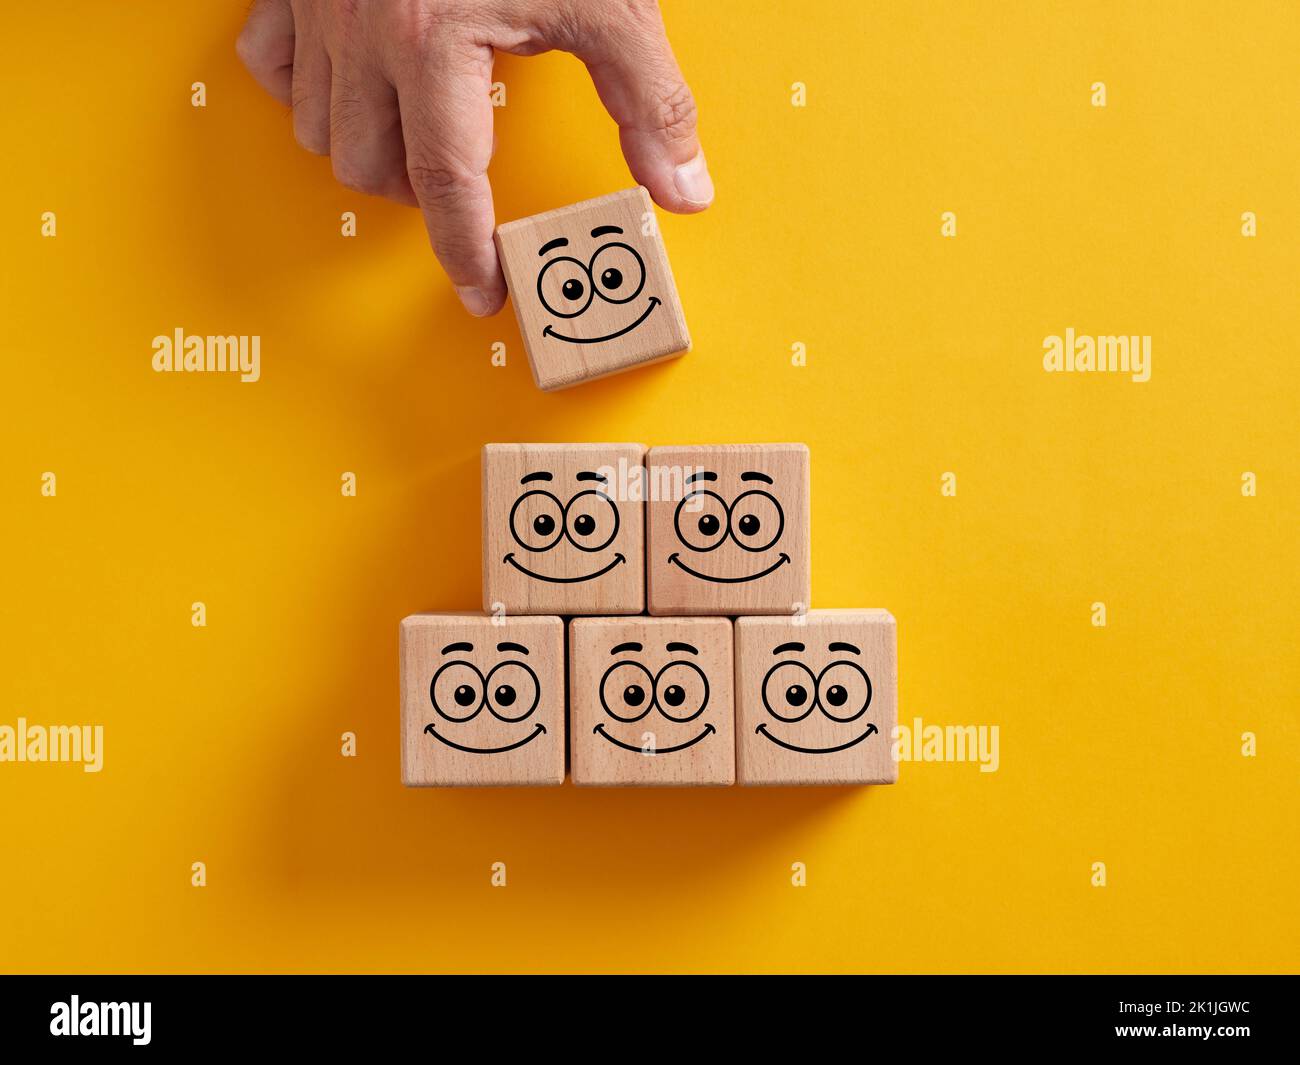 Hand placing wooden cubes with smiling face emoticons arranged in pyramid staircase. Positive attitude, customer satisfaction, emotional management or Stock Photo